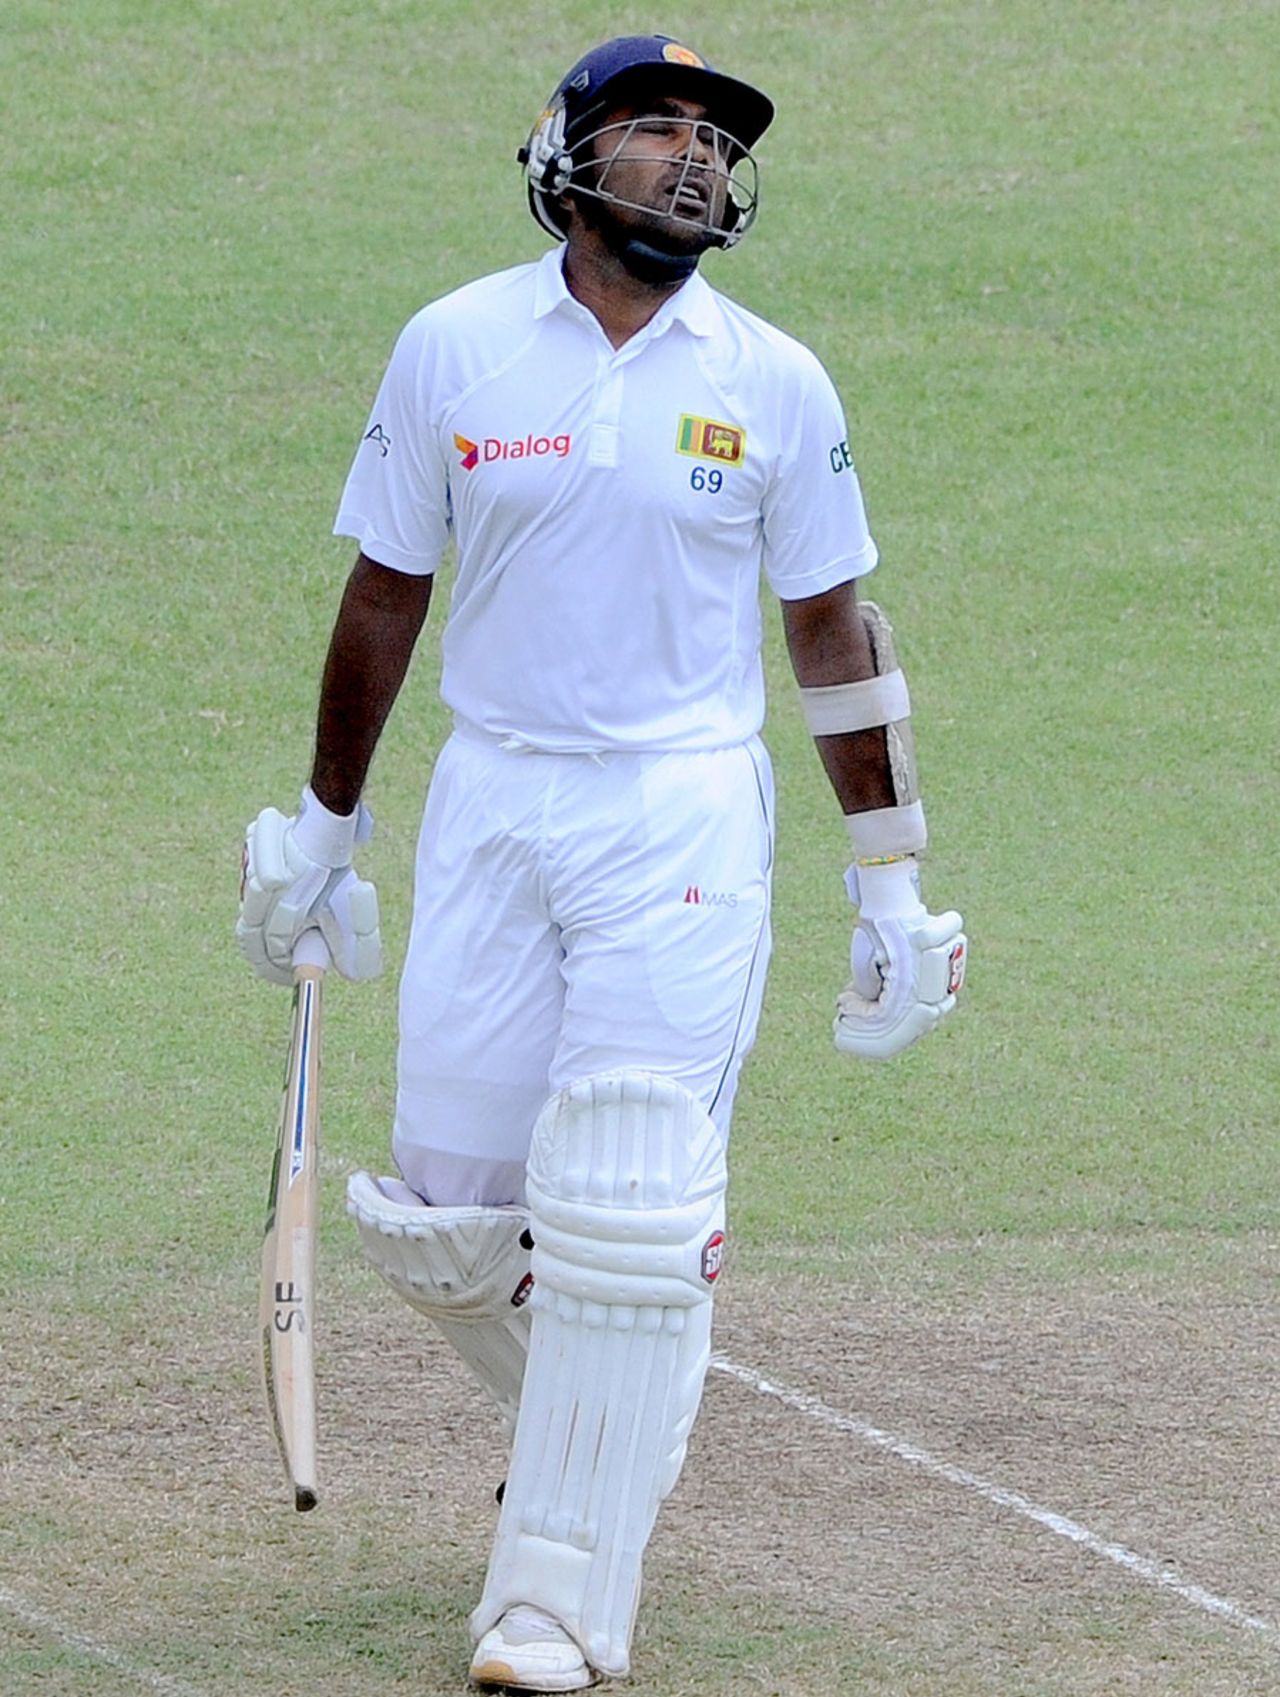 Mahela Jayawardene is disappointed after falling for the last time in Tests, Sri Lanka v Pakistan, 2nd Test, Colombo, 4th day, August 17, 2014